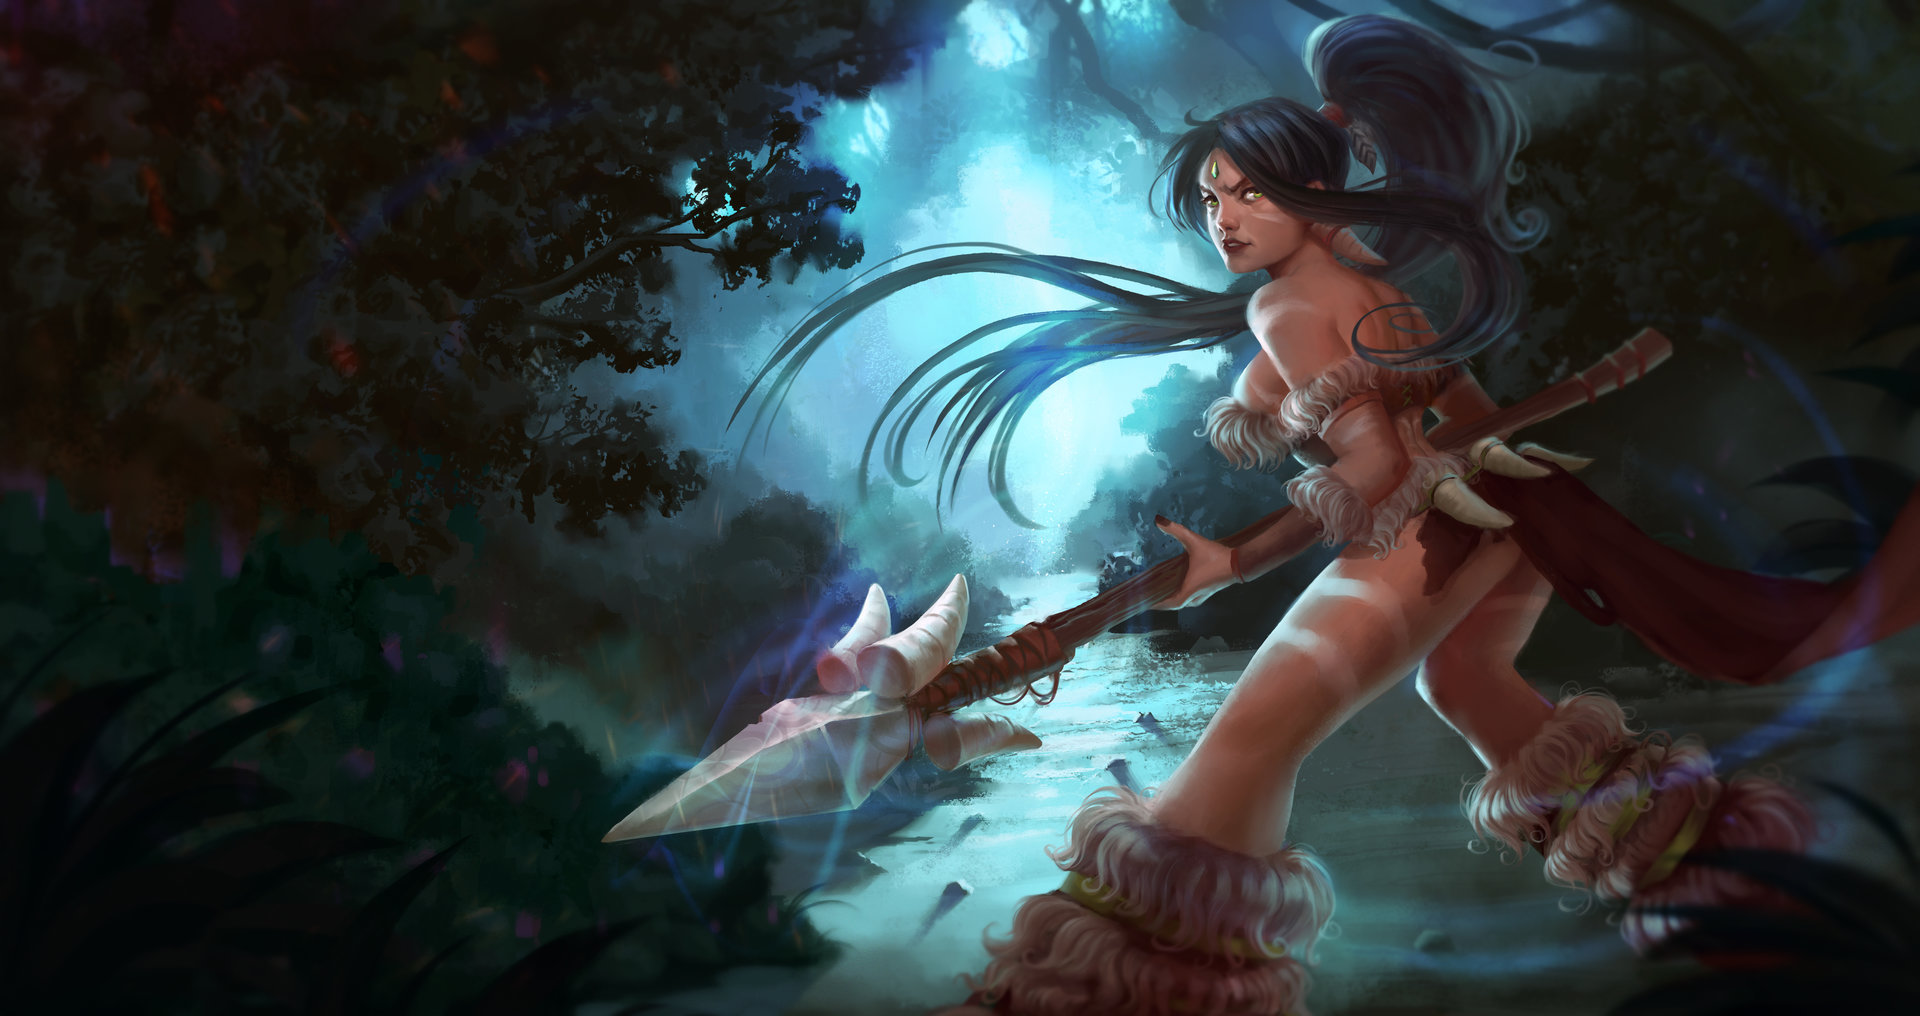 arianto chen recommends Nidalee Queen Of The Jungle